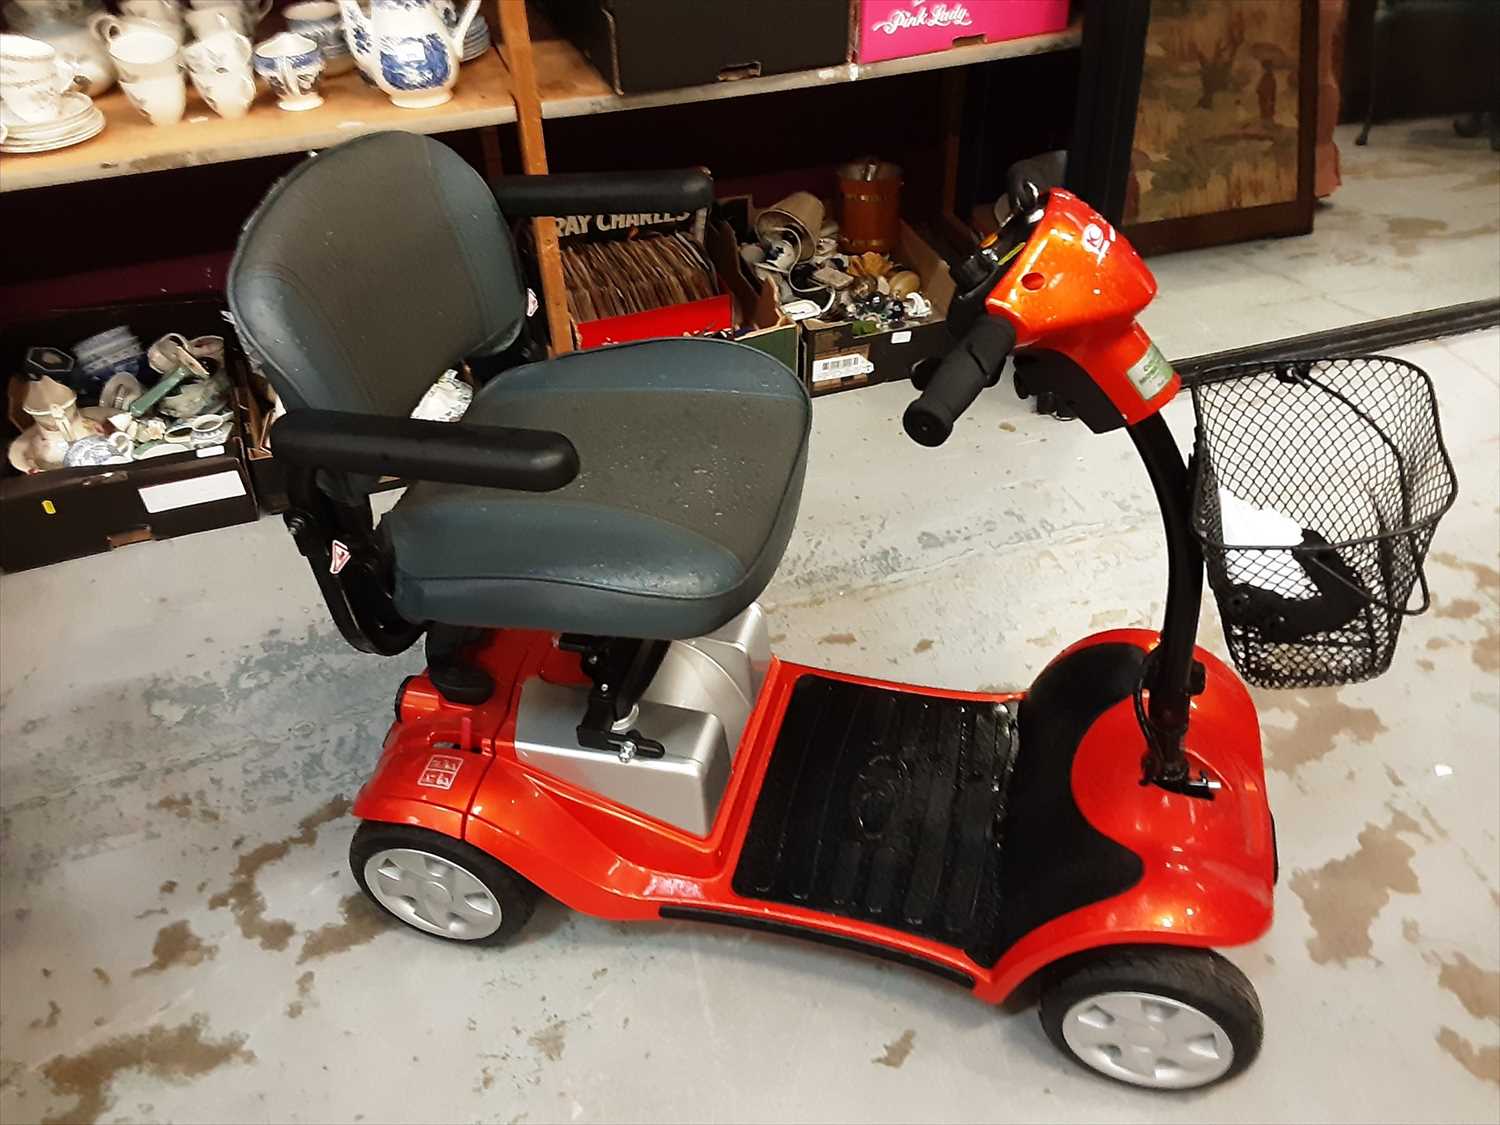 Lot 5 - KYMCO mobility scooter with keys